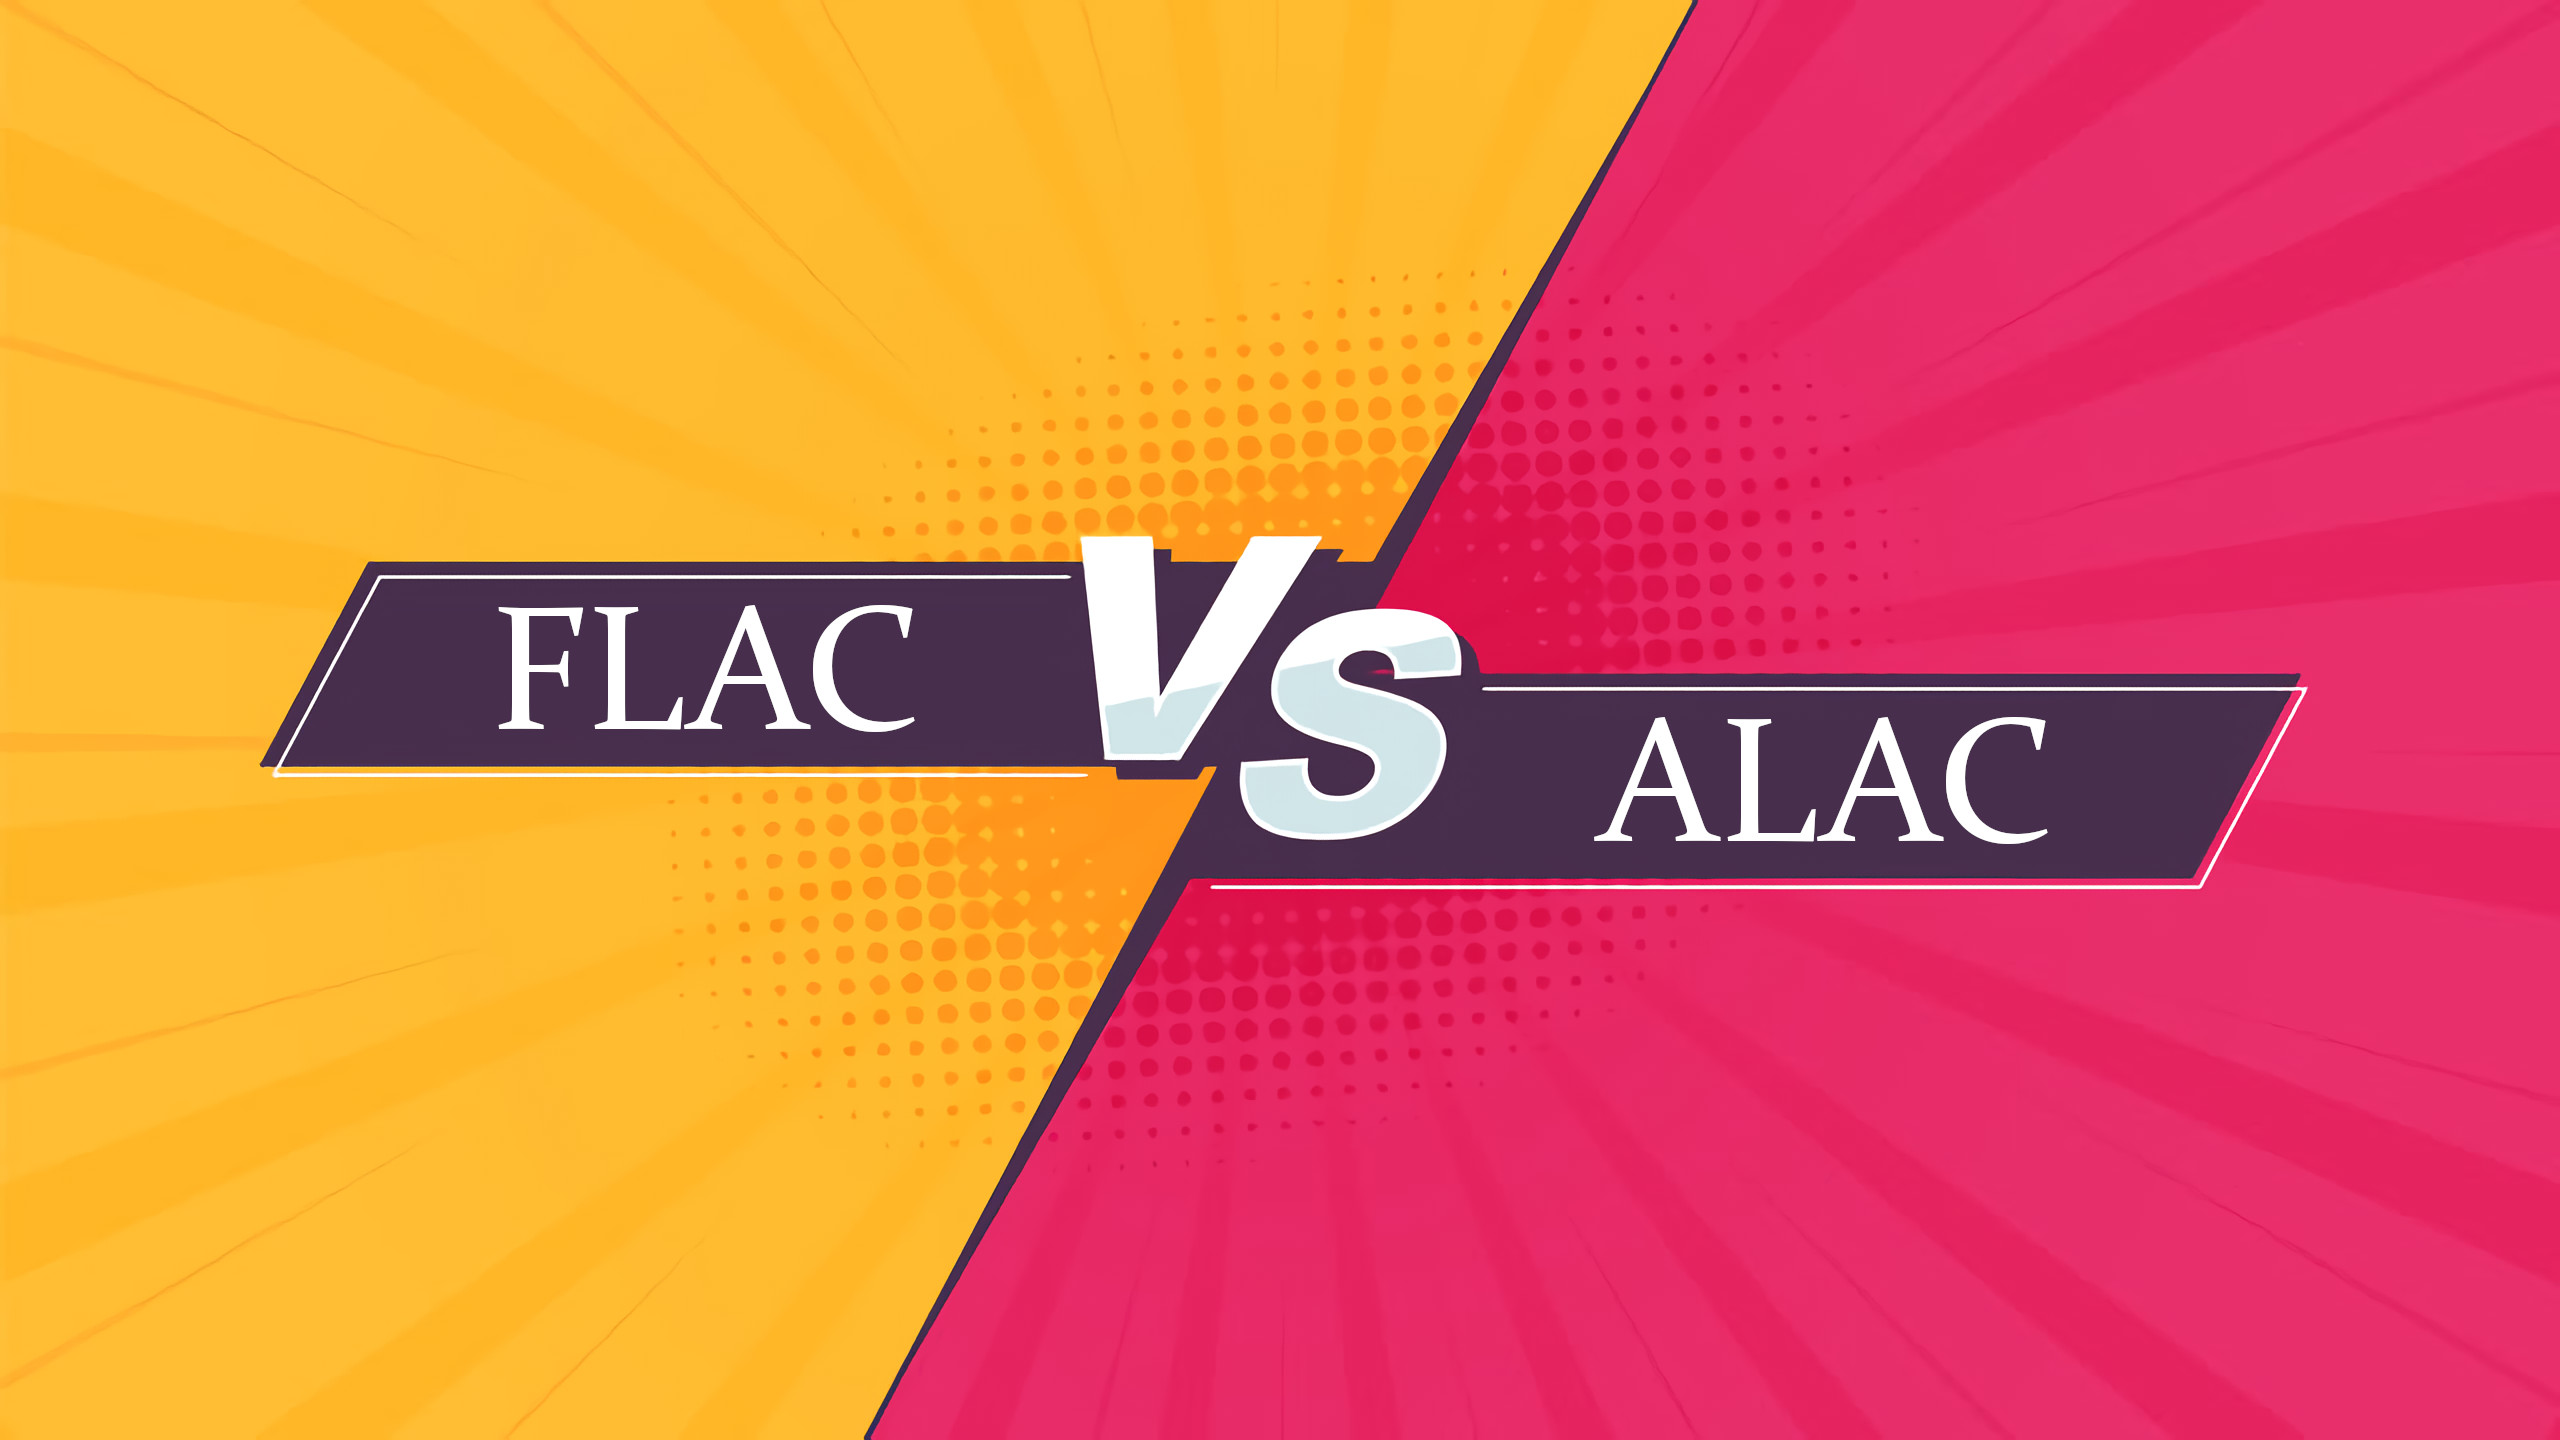 difference between flac and alac, flac vs alac, flac and alac comparison